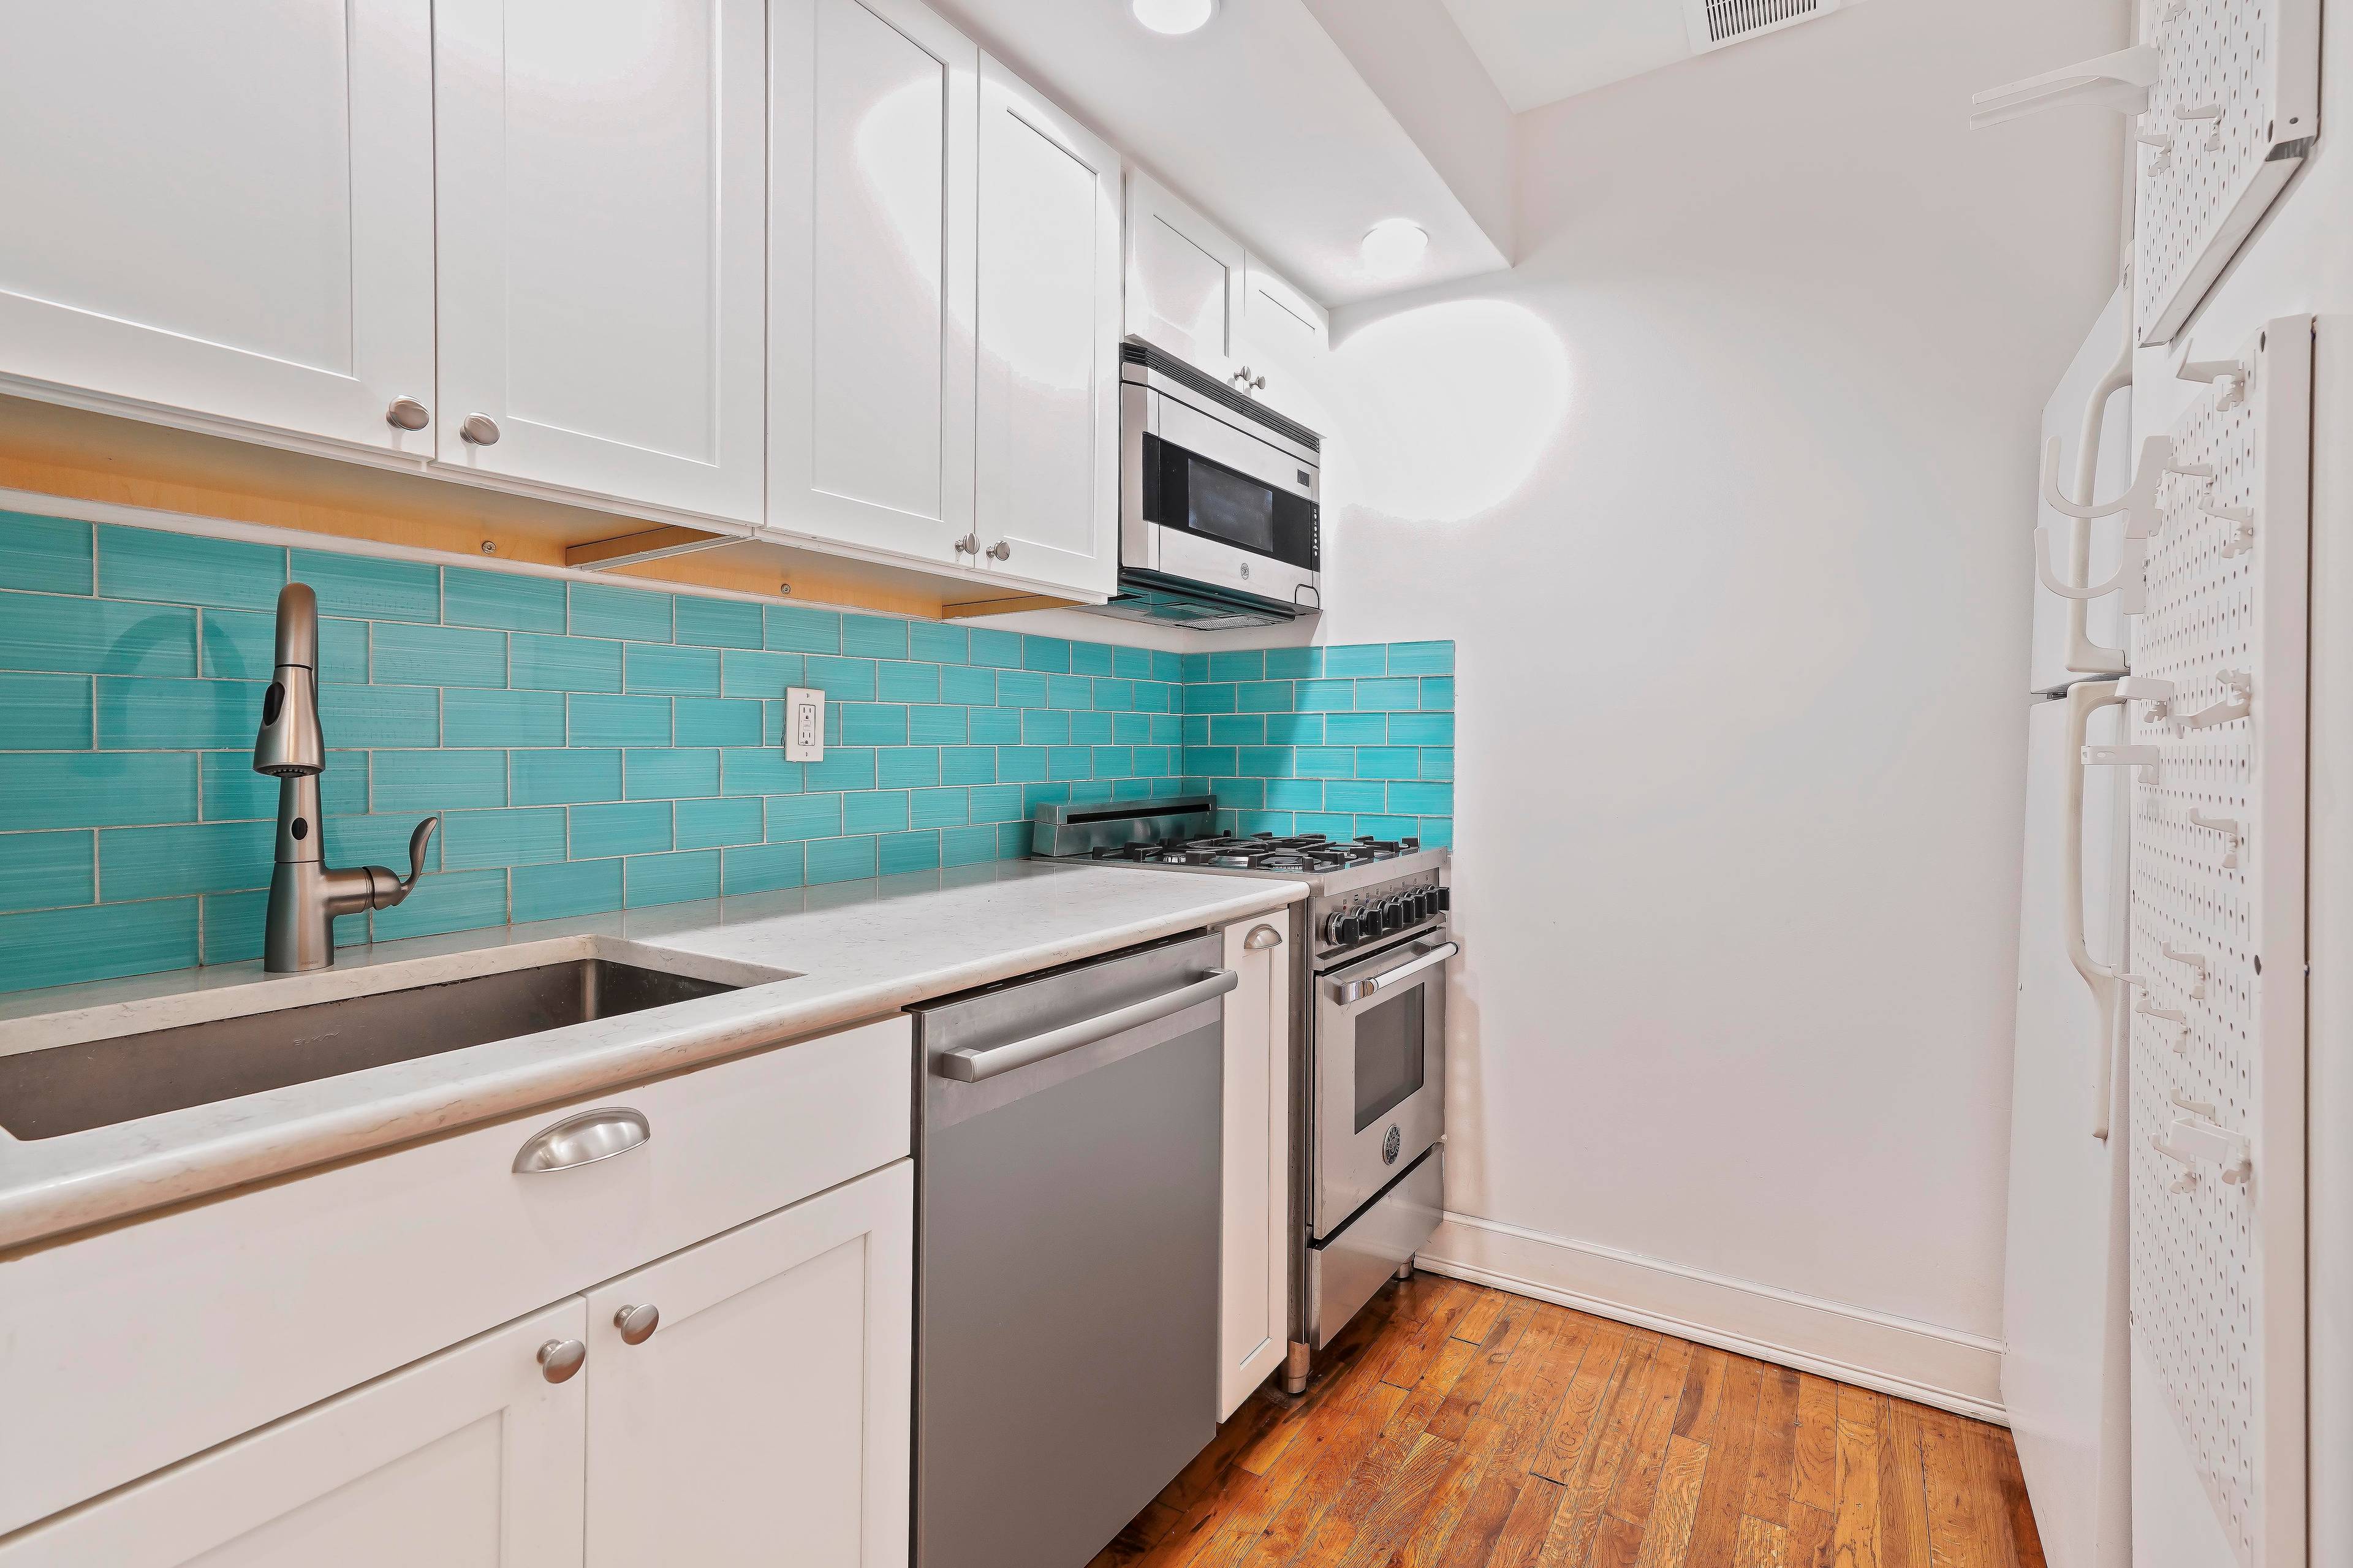 Welcome home. This sunny and spacious, one bedroom, one and a half bath, upper floor Duplex features the highly coveted and rare, private roof deck area, in prime South Slope.